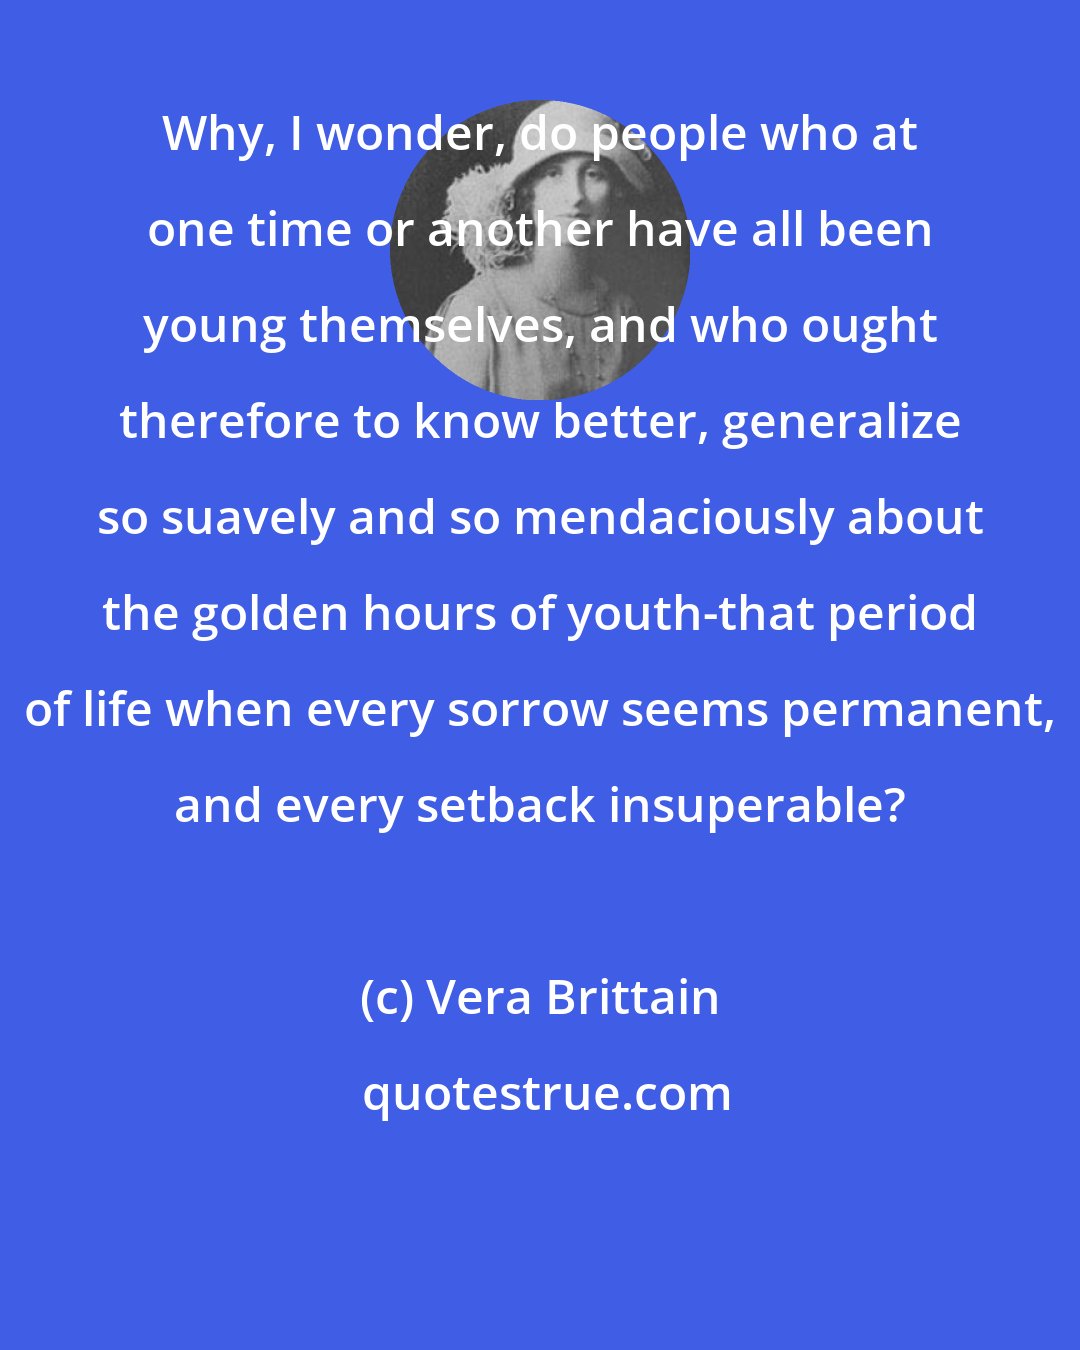 Vera Brittain: Why, I wonder, do people who at one time or another have all been young themselves, and who ought therefore to know better, generalize so suavely and so mendaciously about the golden hours of youth-that period of life when every sorrow seems permanent, and every setback insuperable?